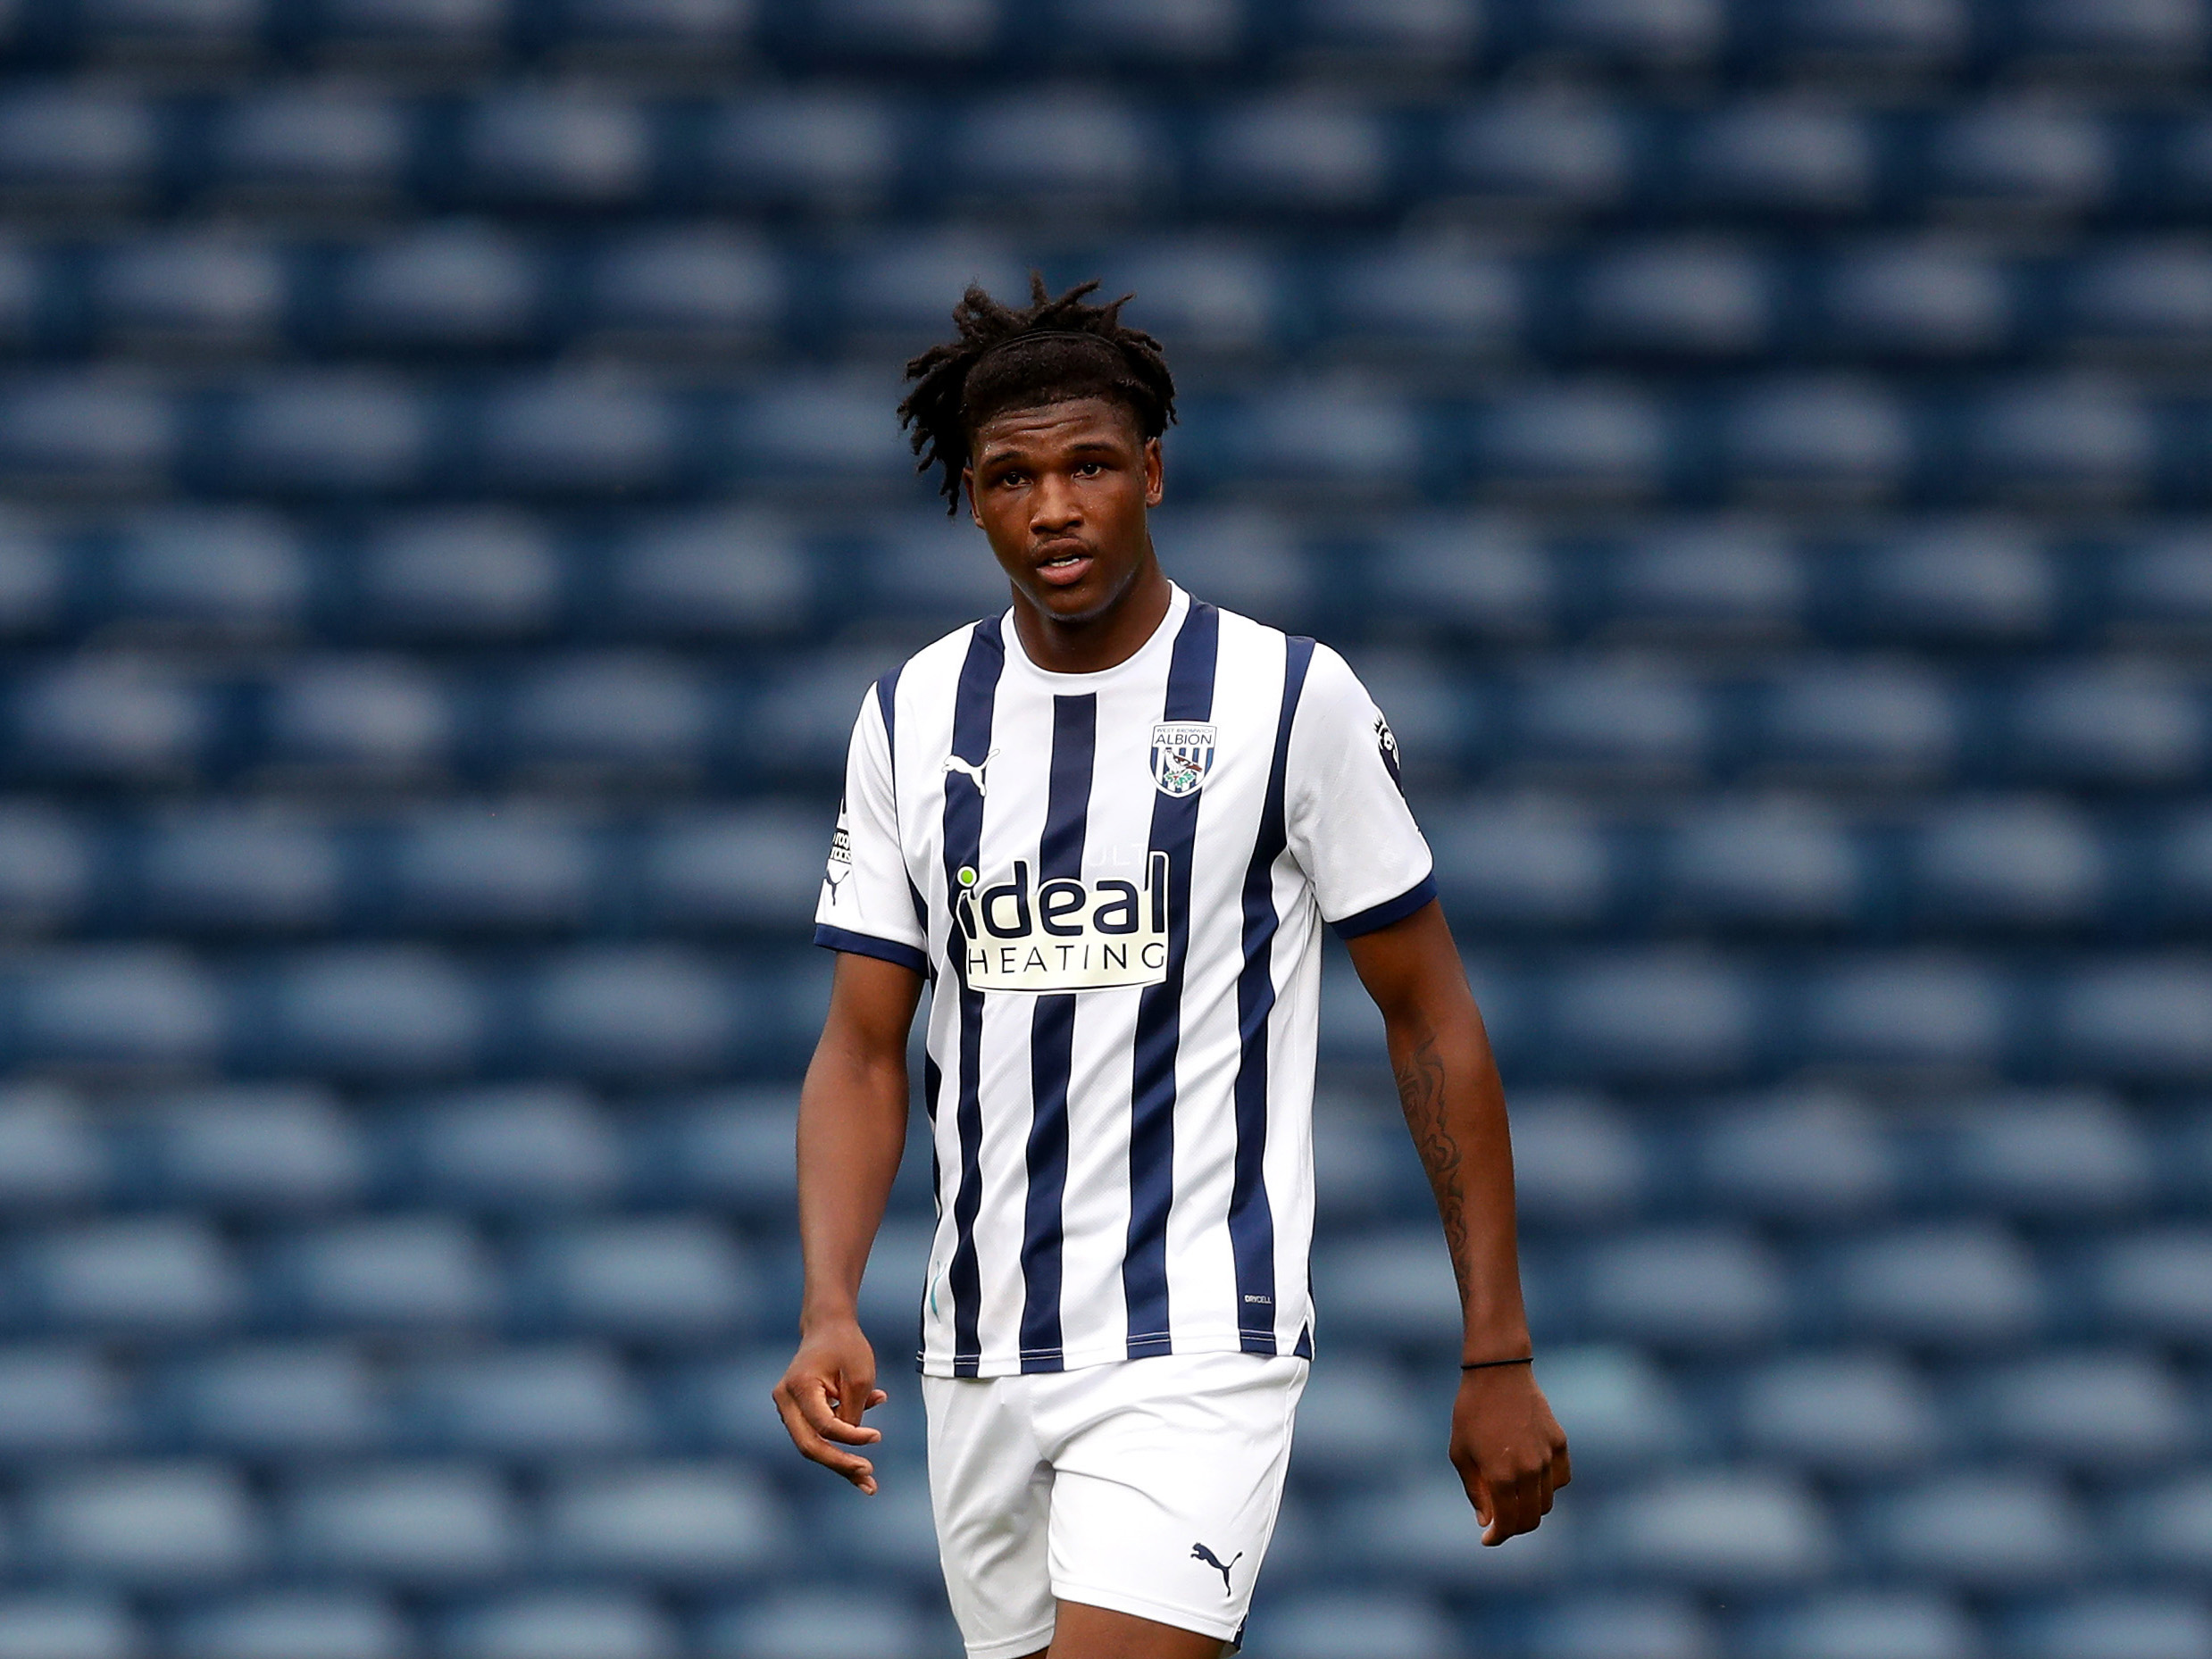 Aaron Harper-Bailey in action for Albion's PL2 team at The Hawthorns